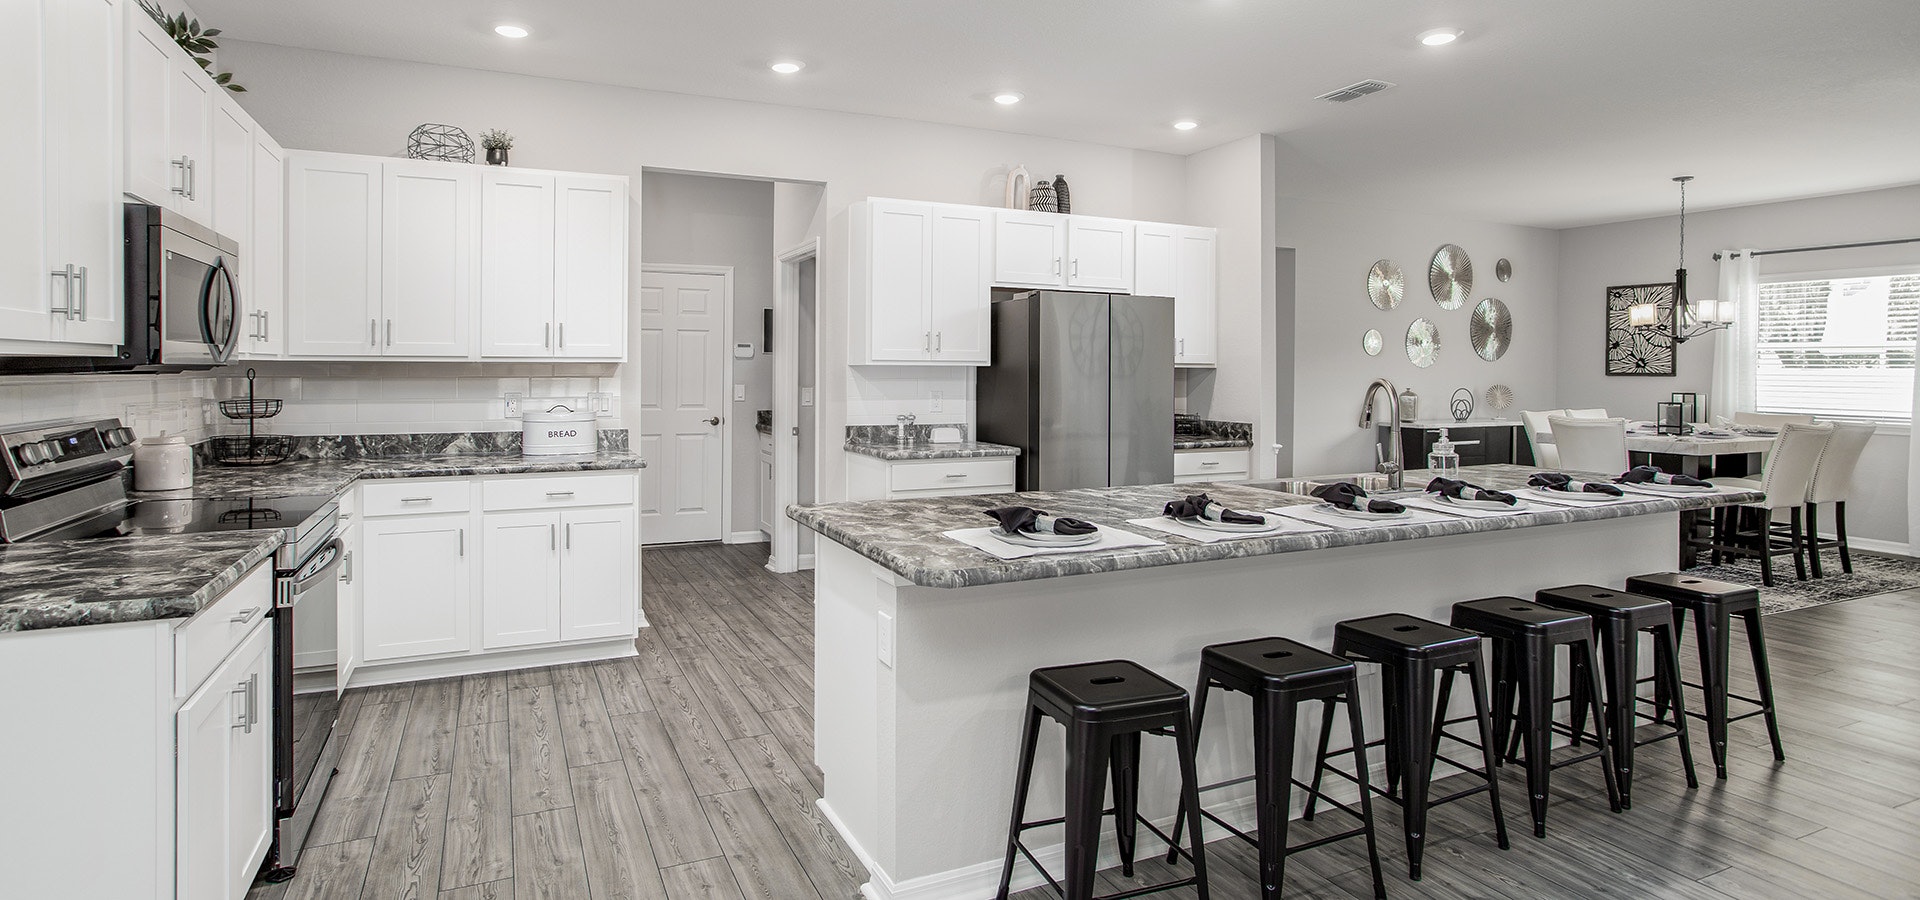 Kitchen in a new home at Copperleaf in Ocala